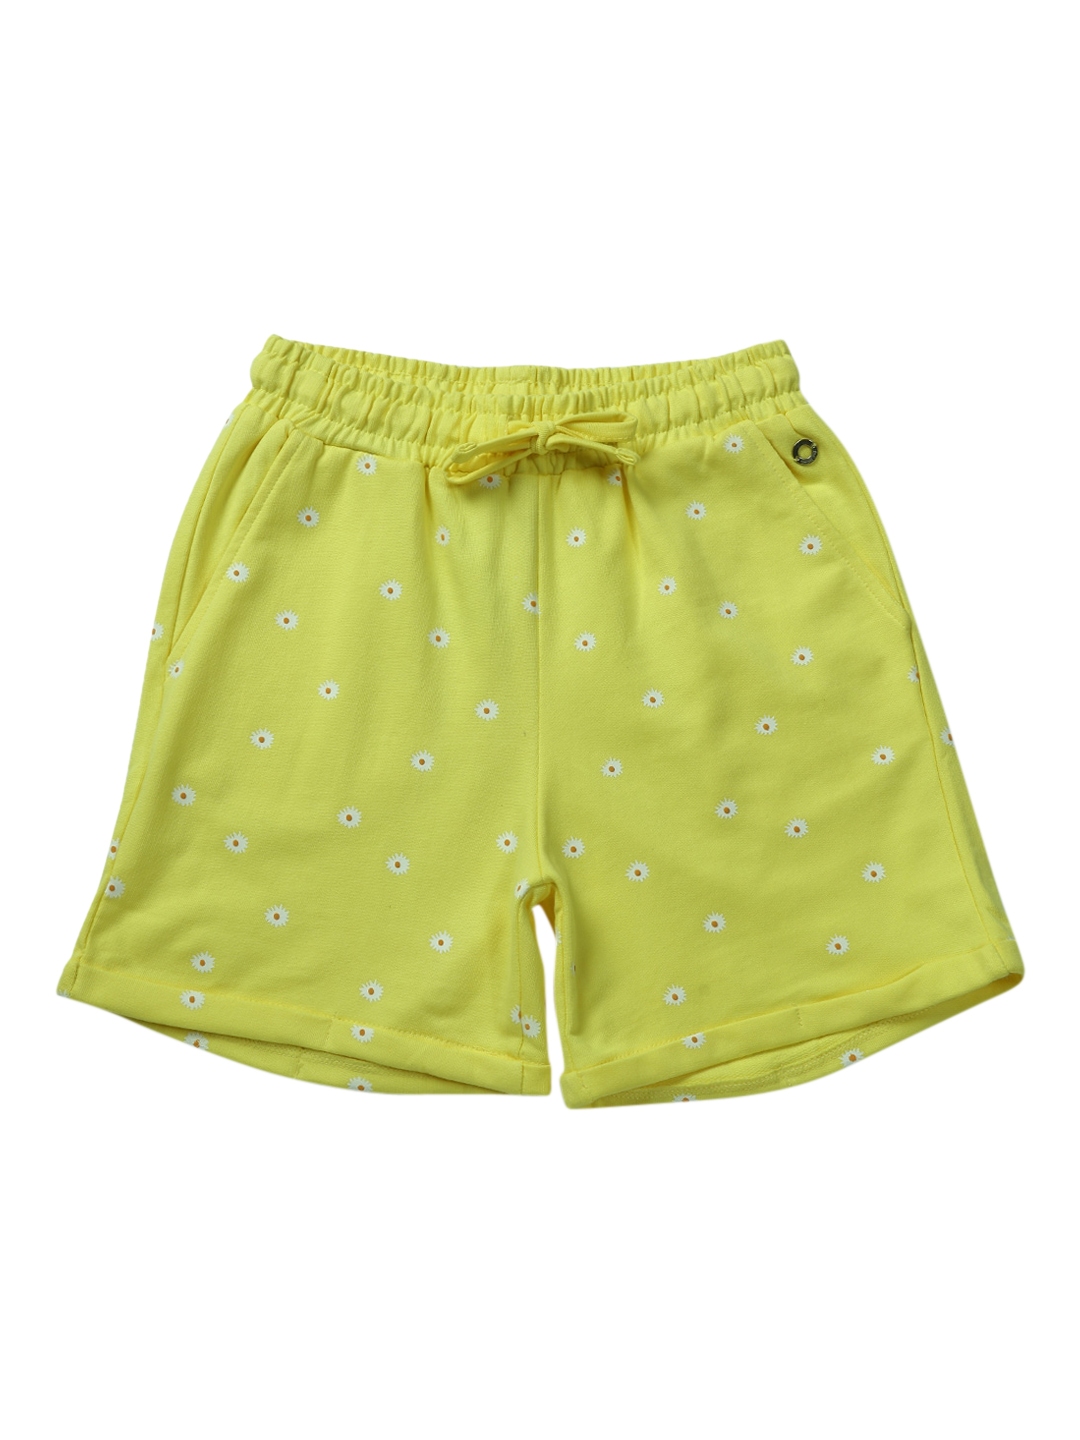 Turquoise cotton summer shorts, Girls 2-14 years old